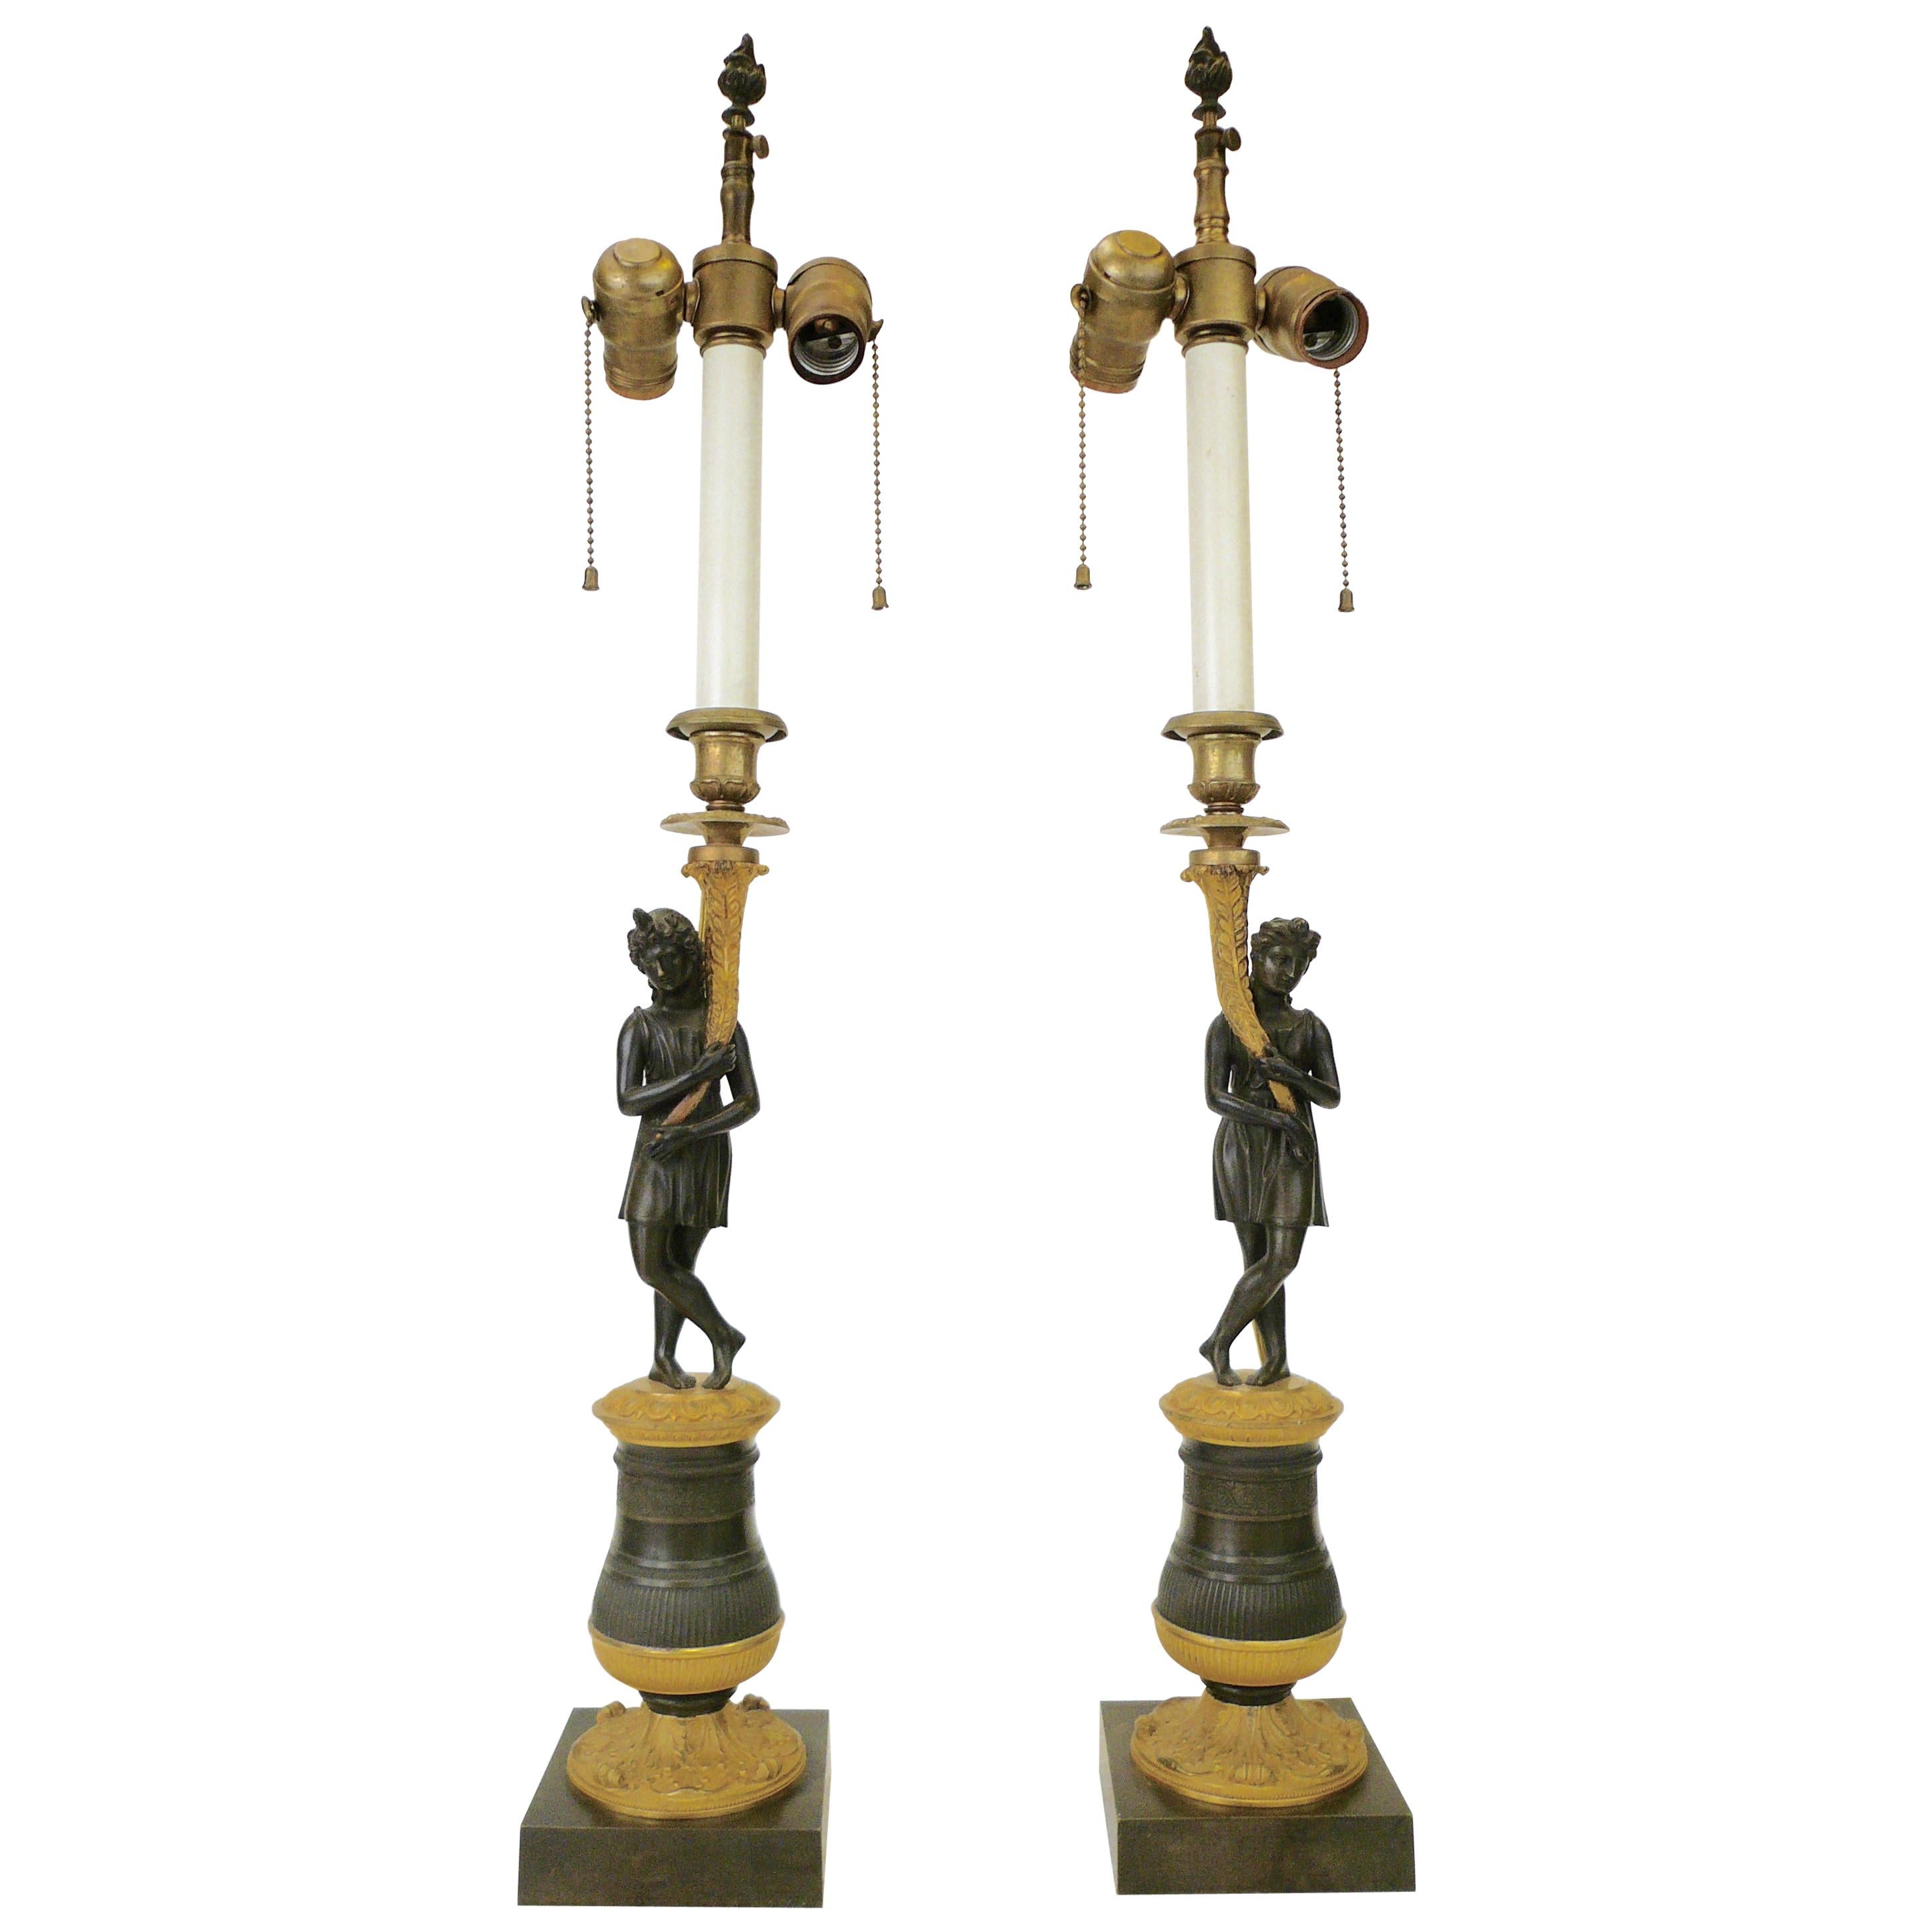 Pair of Charles X Gilt and Patinated Bronze Figural Candlestick Lamps